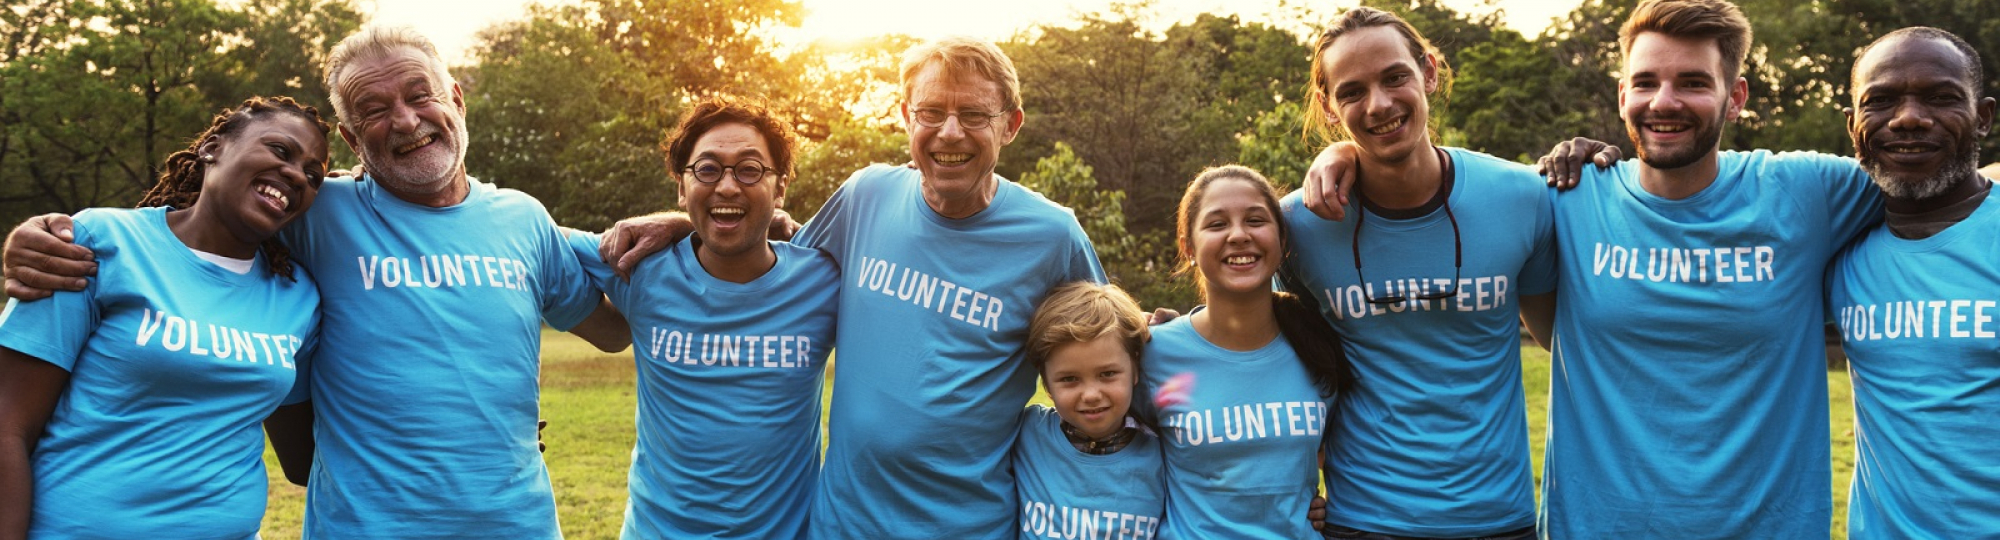 Group individuals of all ages wearing VOLUNTEER t-shirts